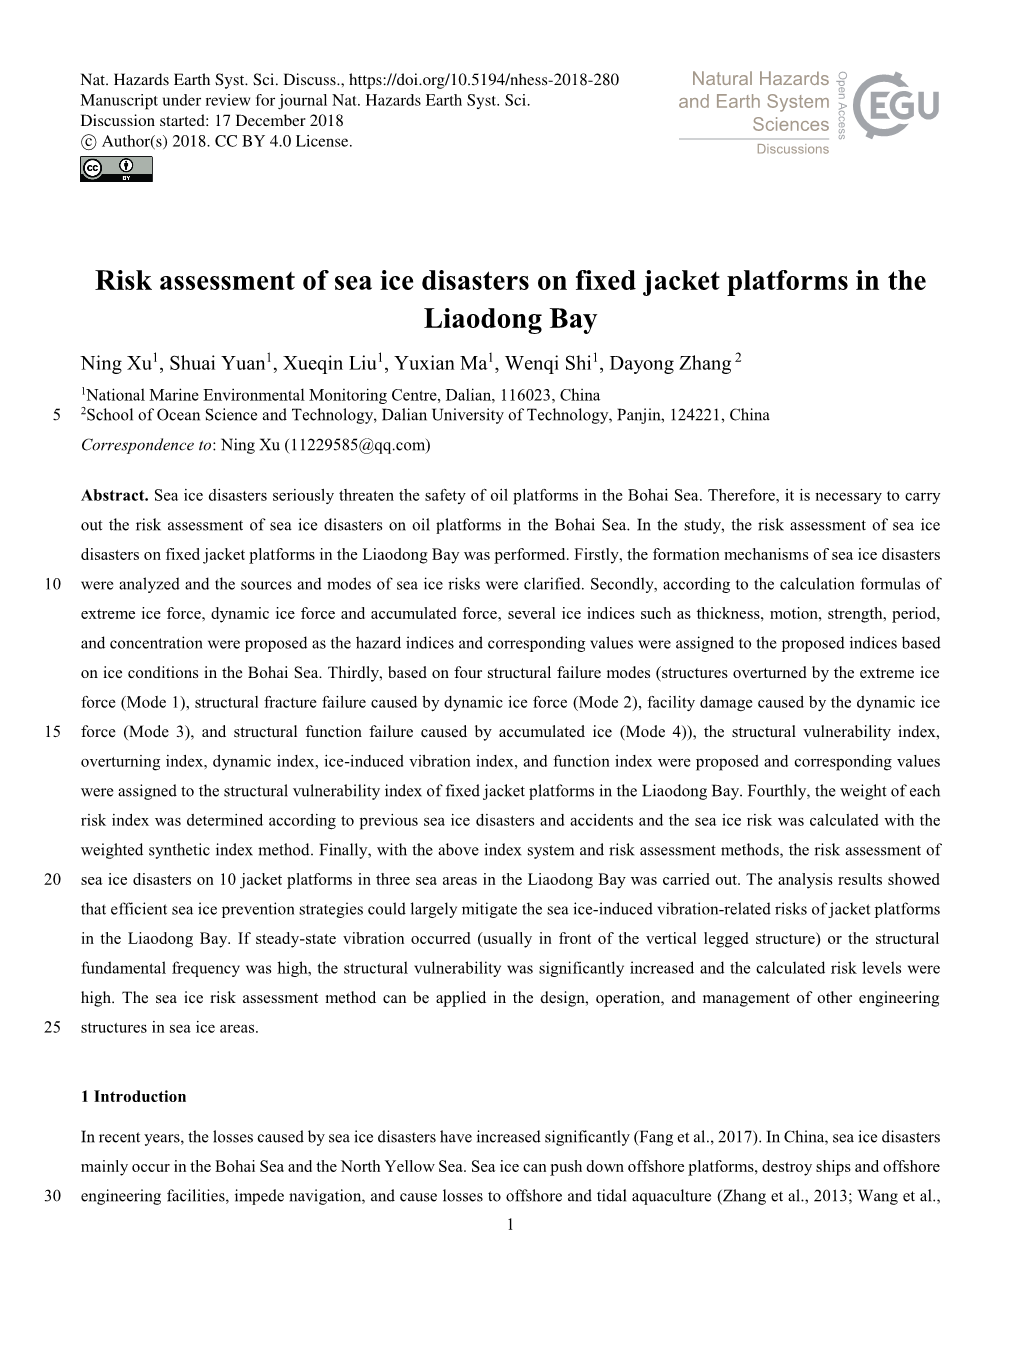 Risk Assessment of Sea Ice Disasters on Fixed Jacket Platforms in The